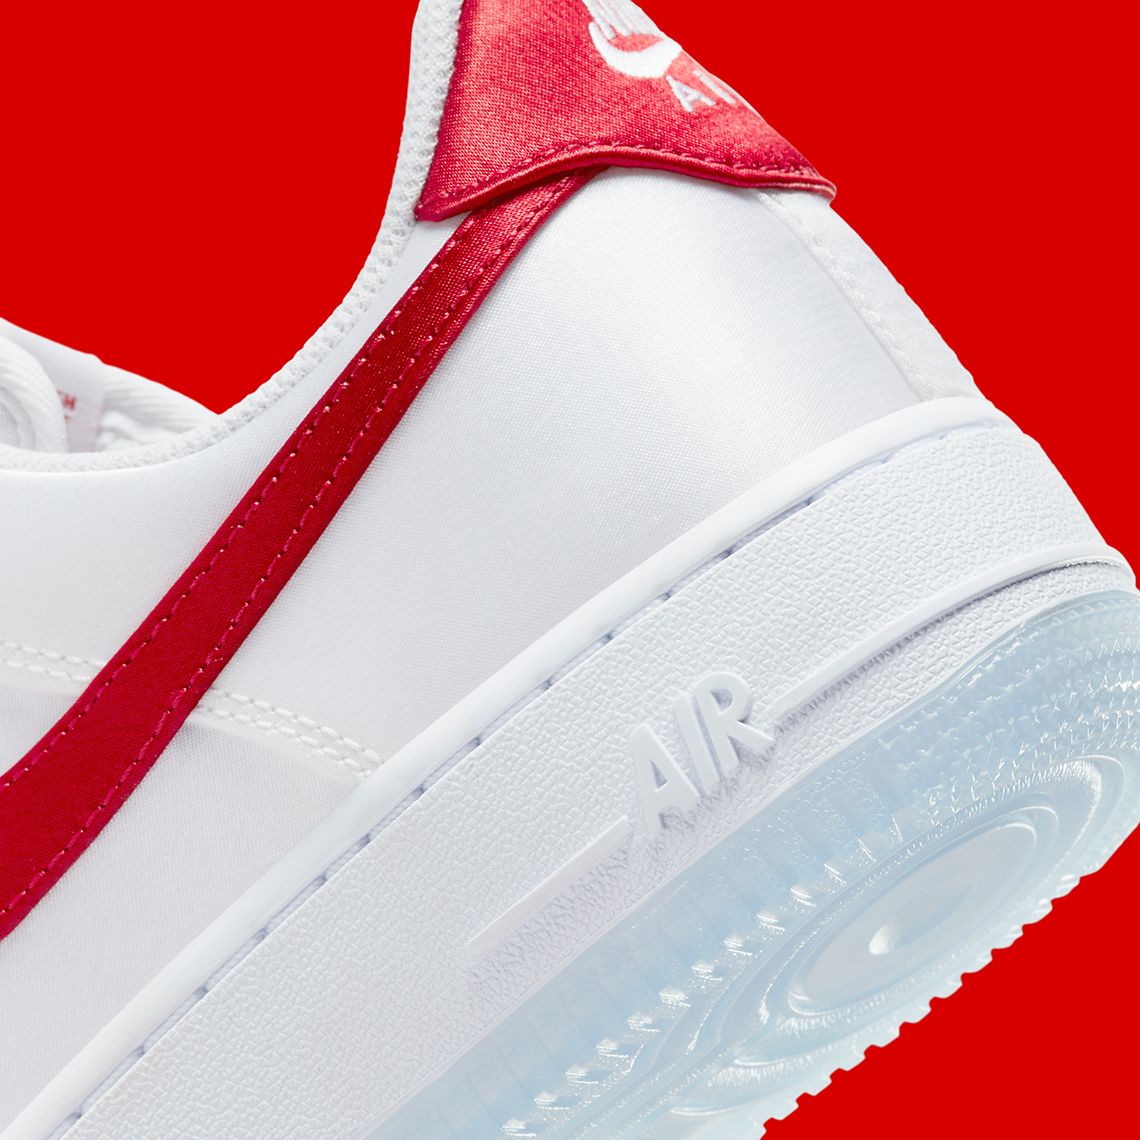 nike LV8 air force 1 low satin white red dx6541 100 6